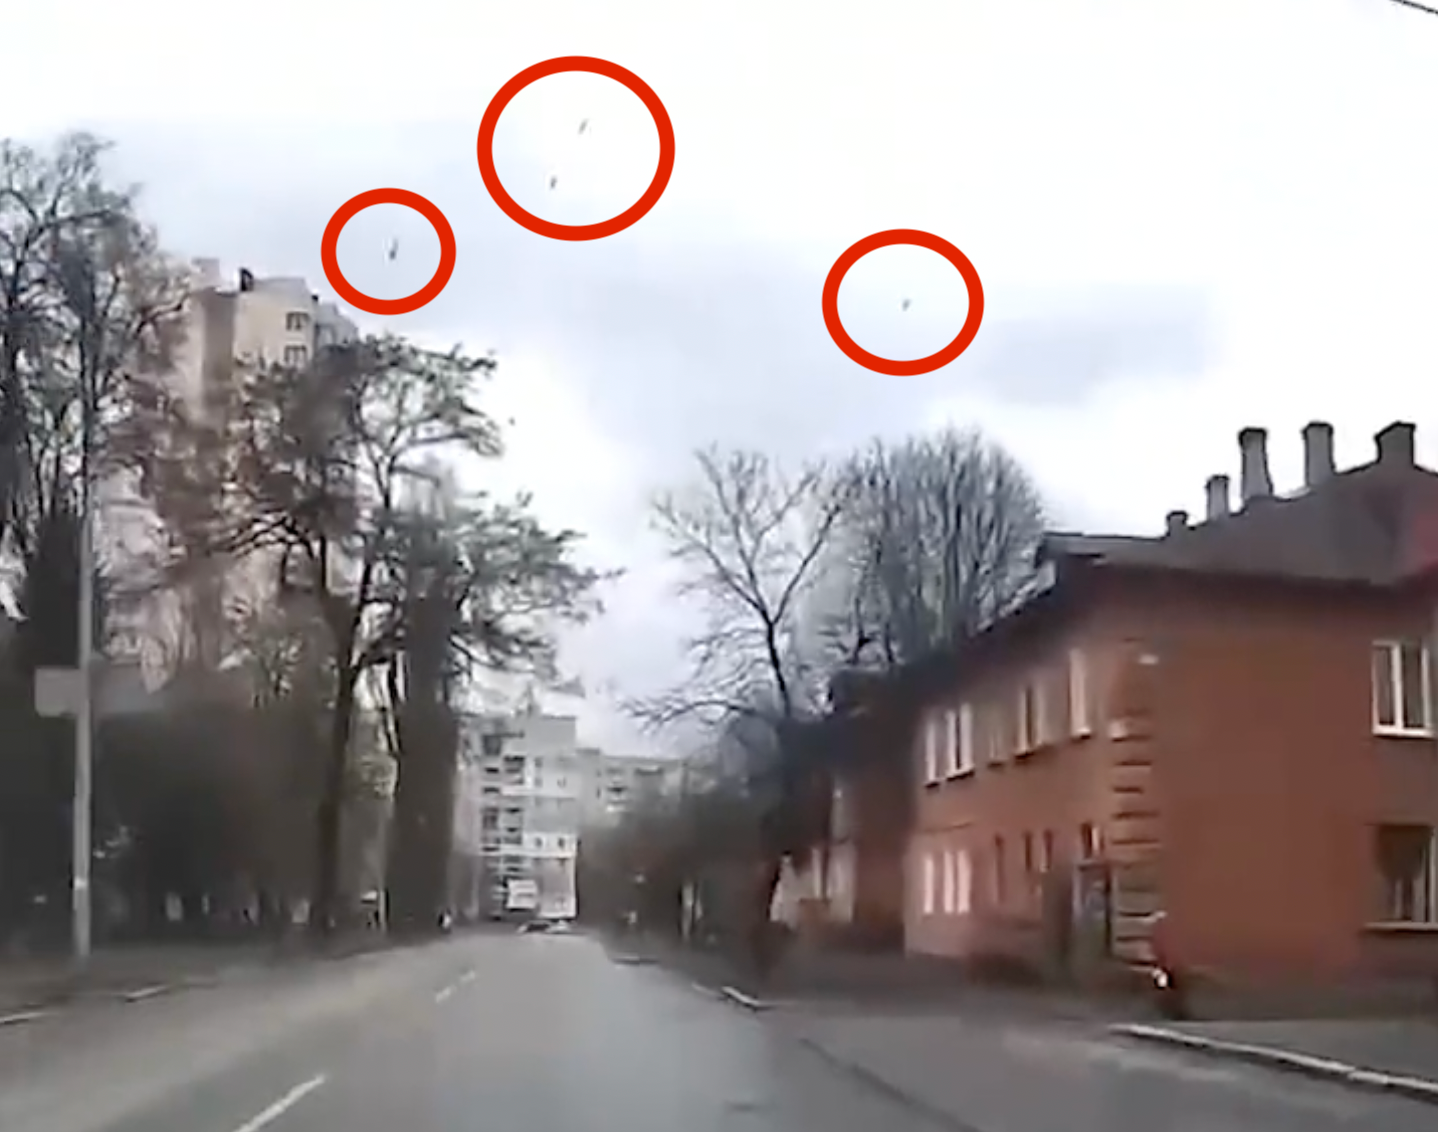 Several missiles being fired at the apartment complex in Chernihiv